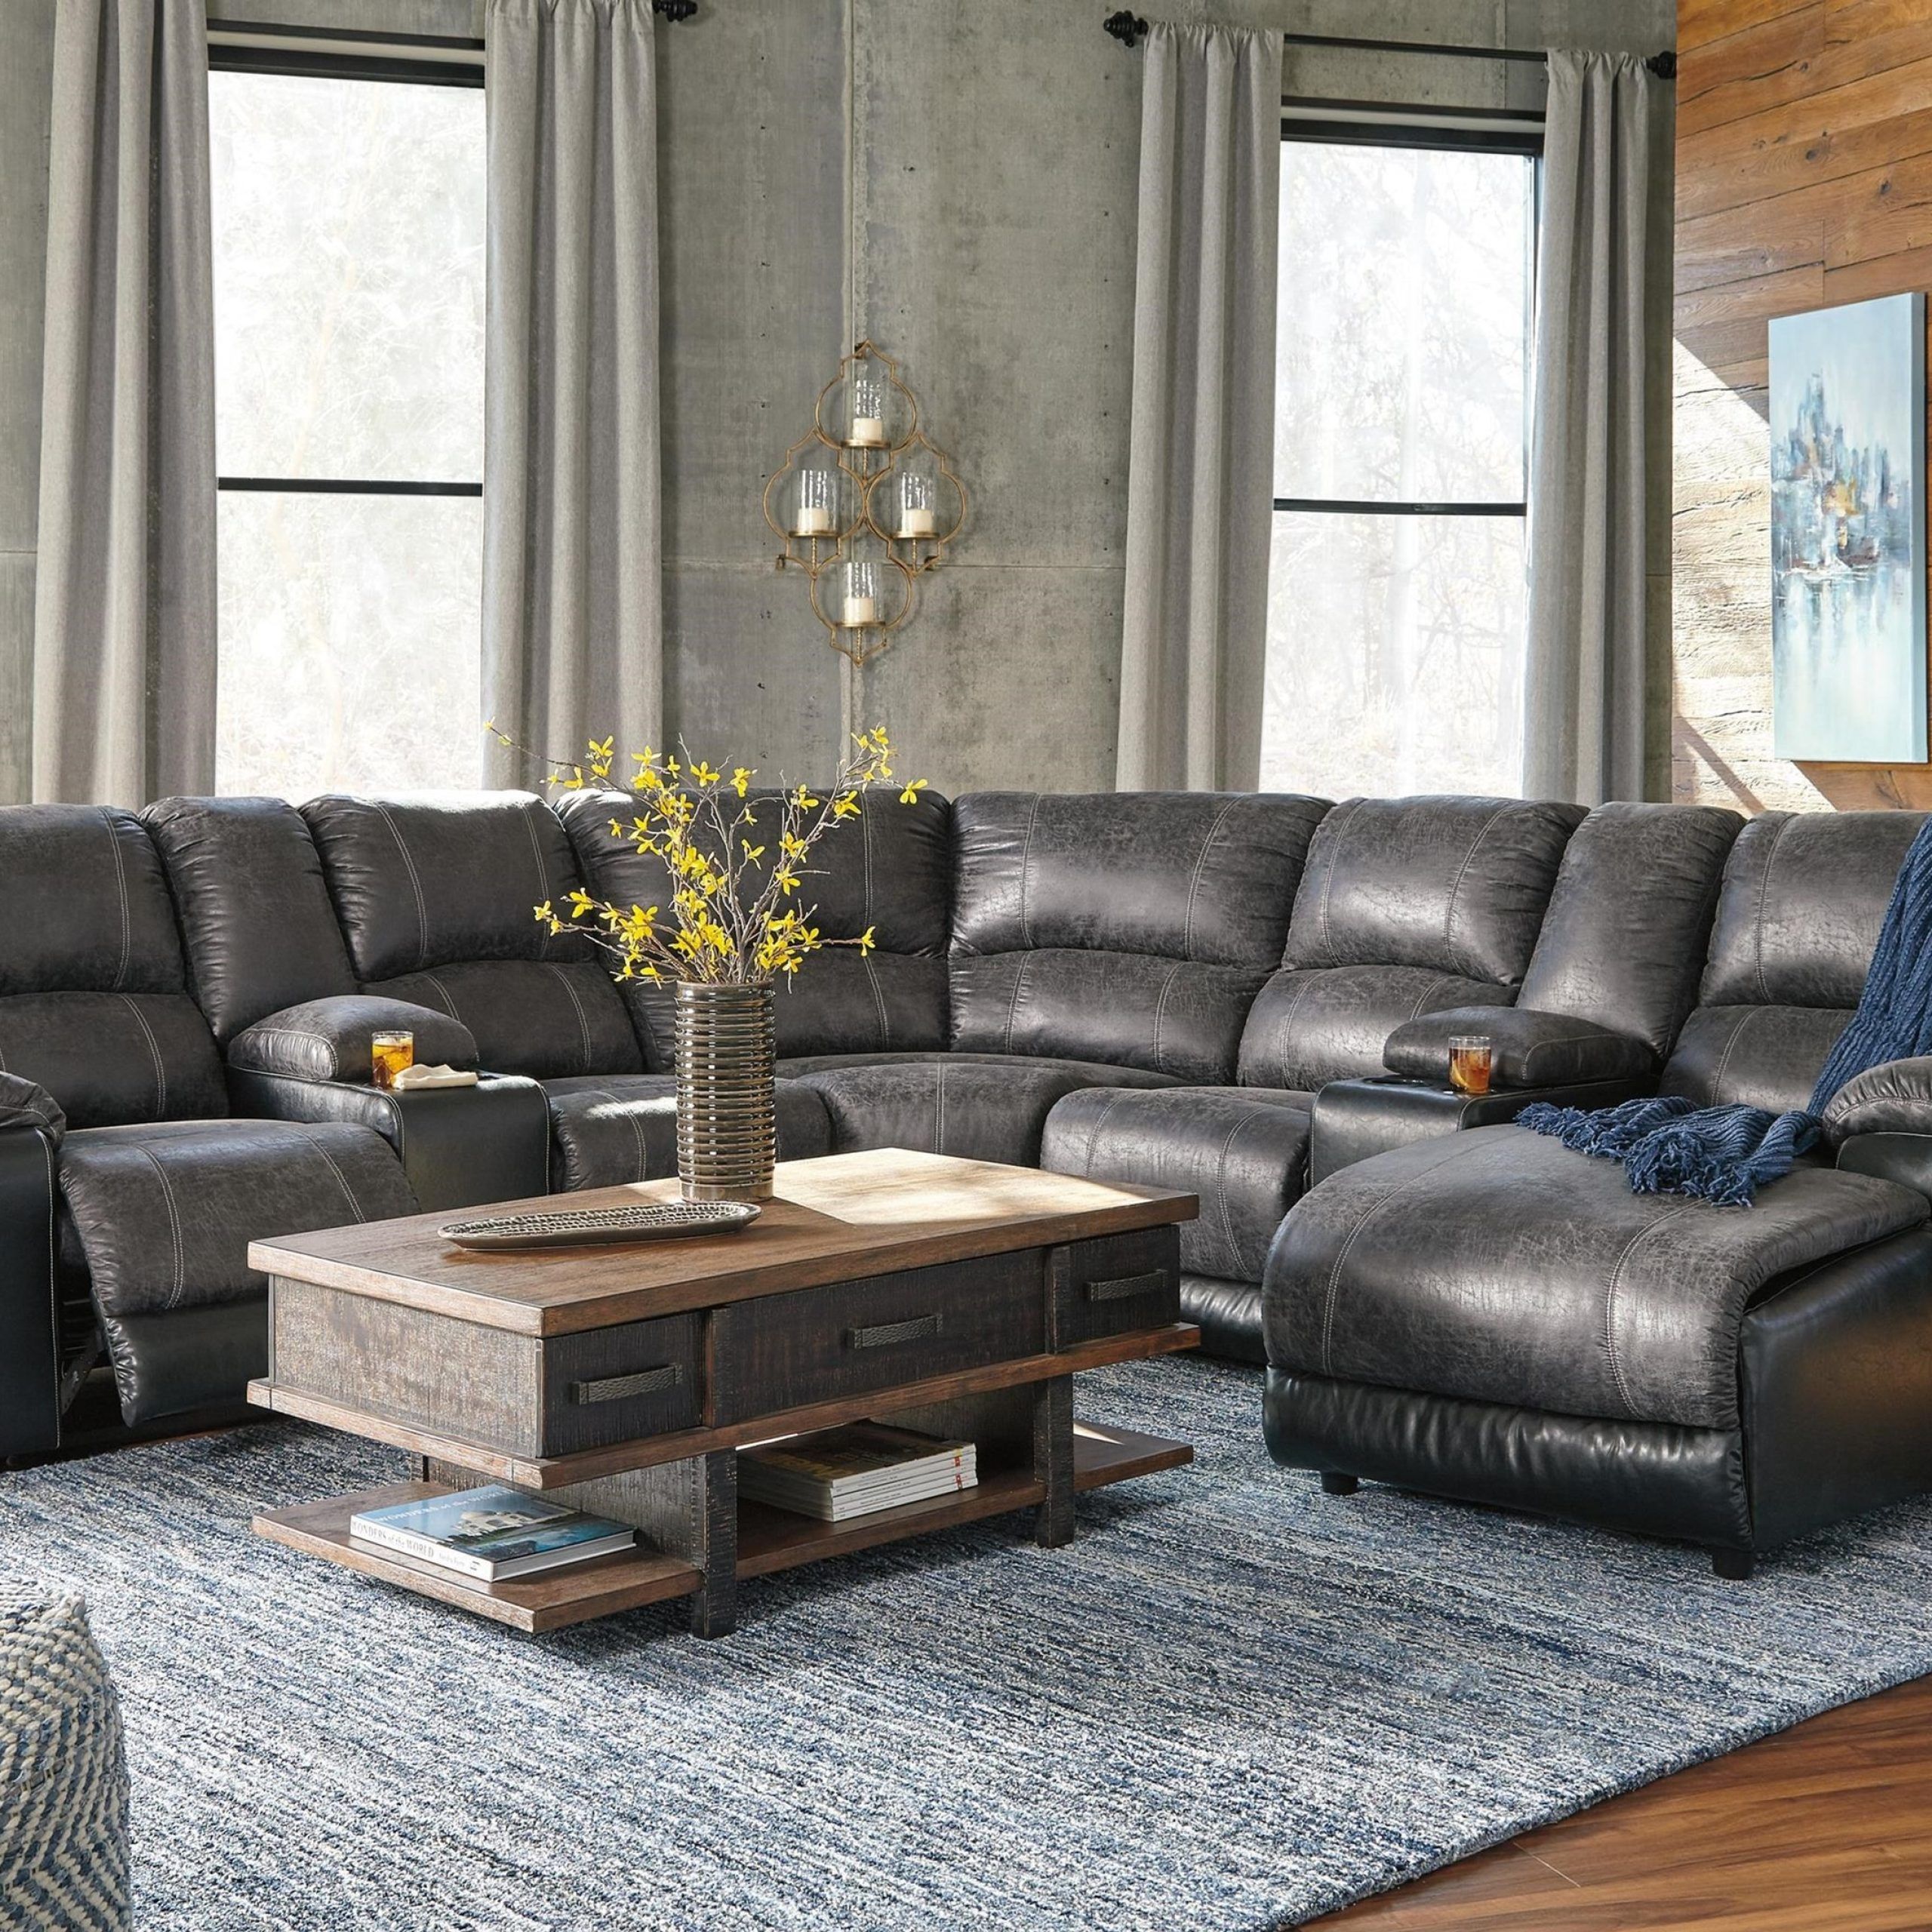 Signature Designashley Nantahala Faux Leather Reclining Sectional Pertaining To Faux Leather Sectional Sofa Sets (Gallery 21 of 21)